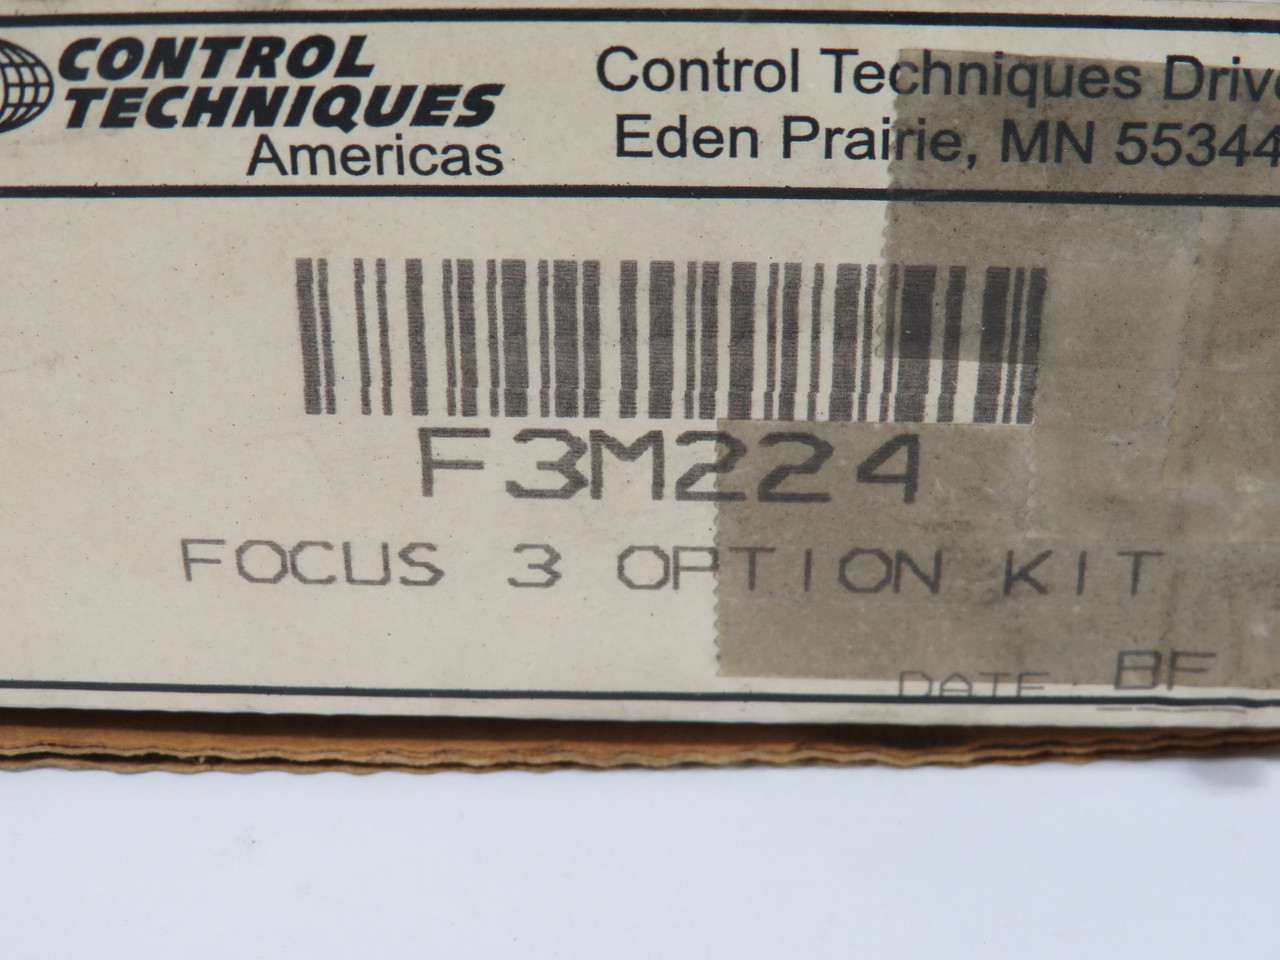 Control Techniques F3M224 "M" Contactor Kit for Focus 3 Drive *Damaged Box* NEW